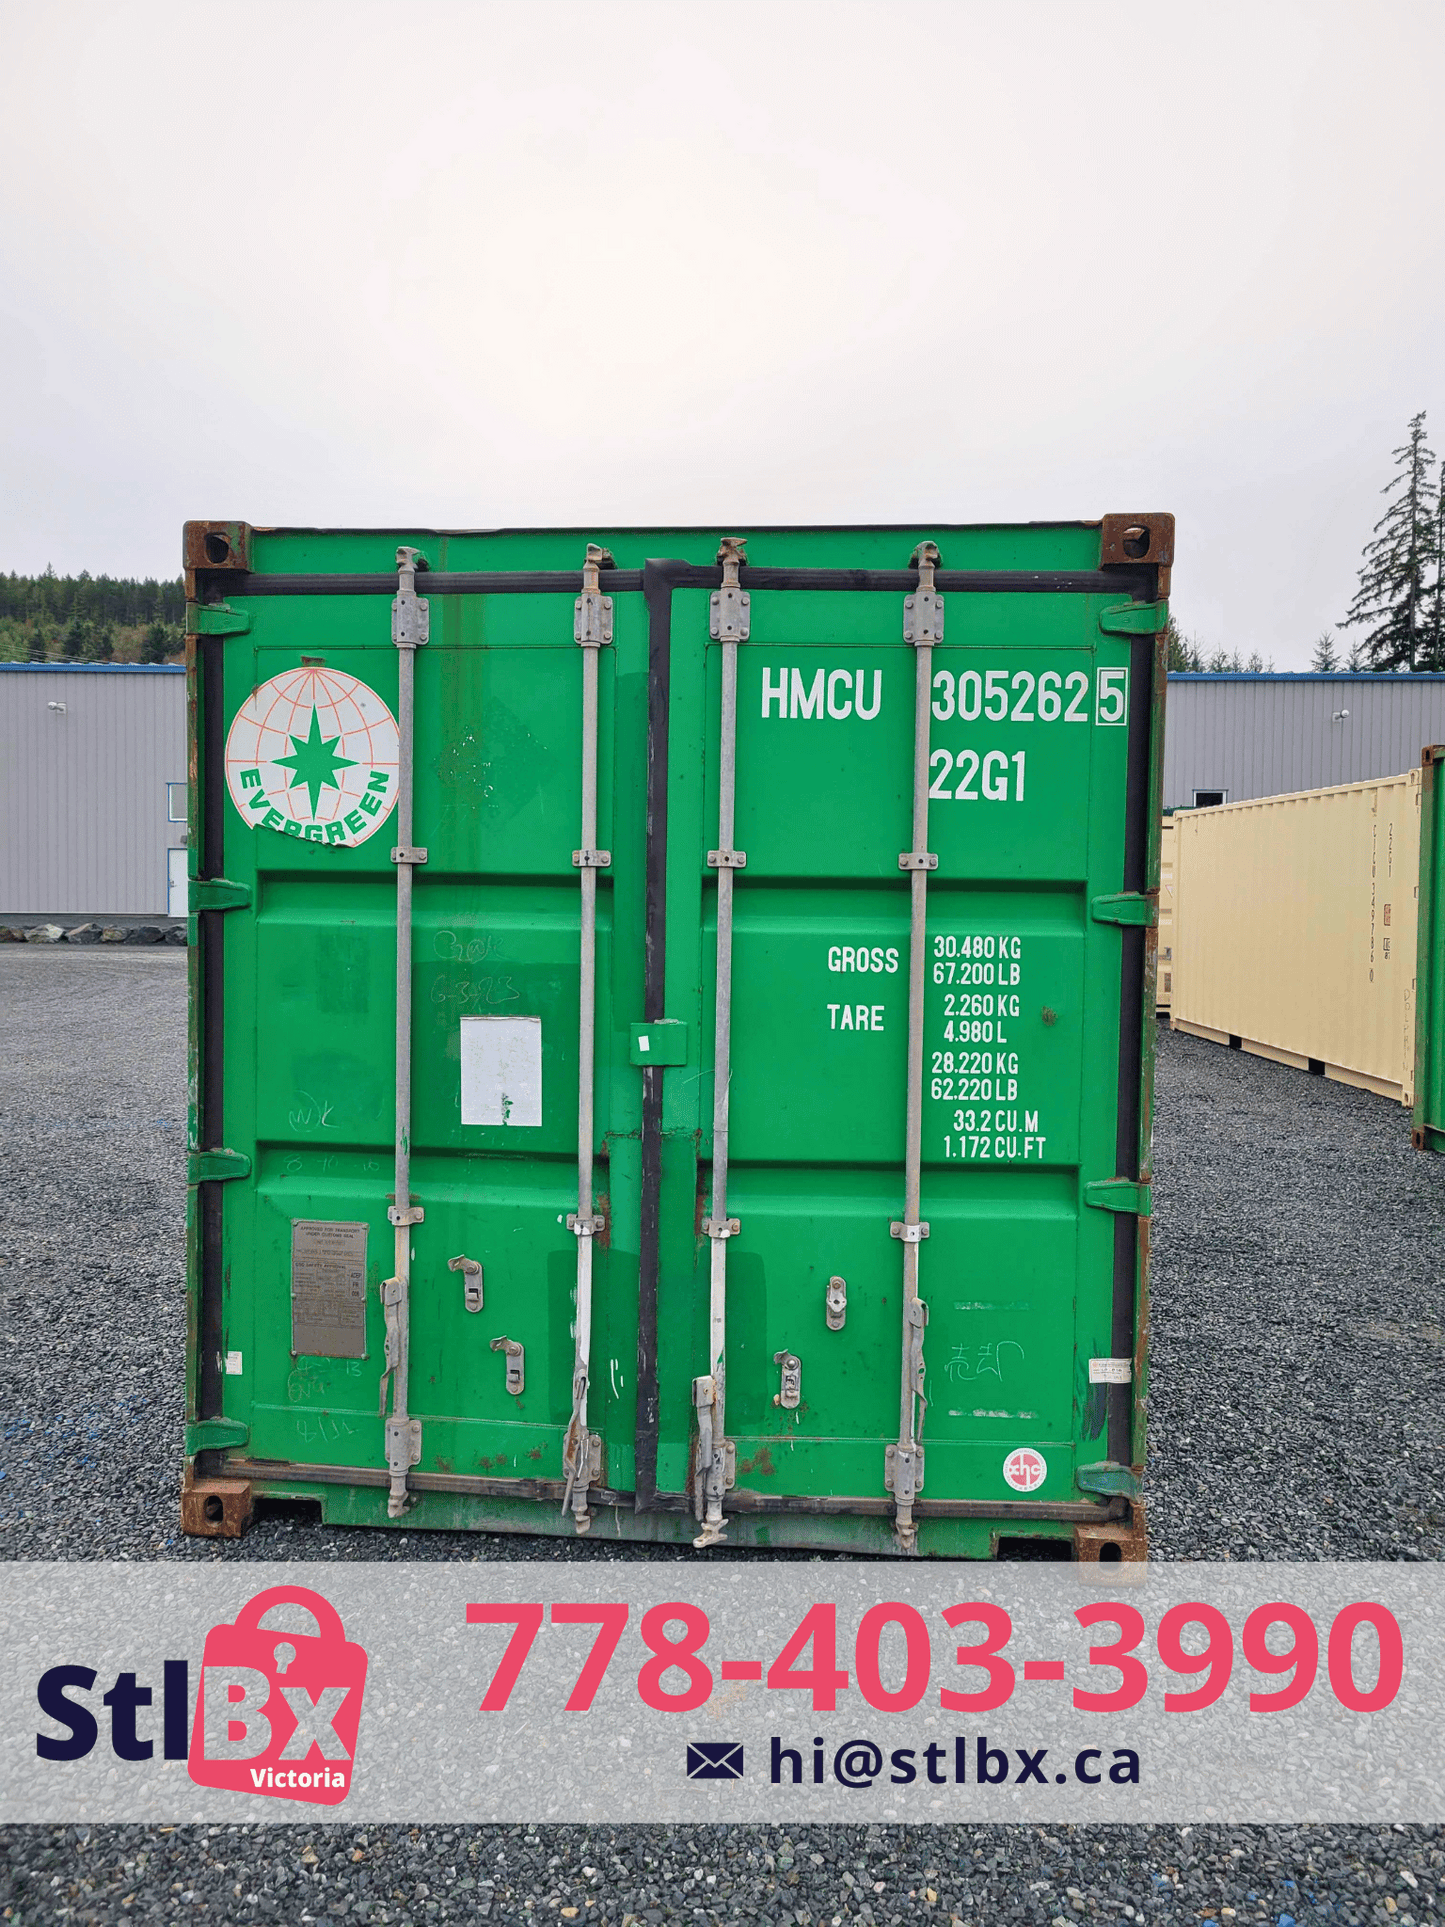 IICL Grade Used Cargo Worthy 20' Shipping Container